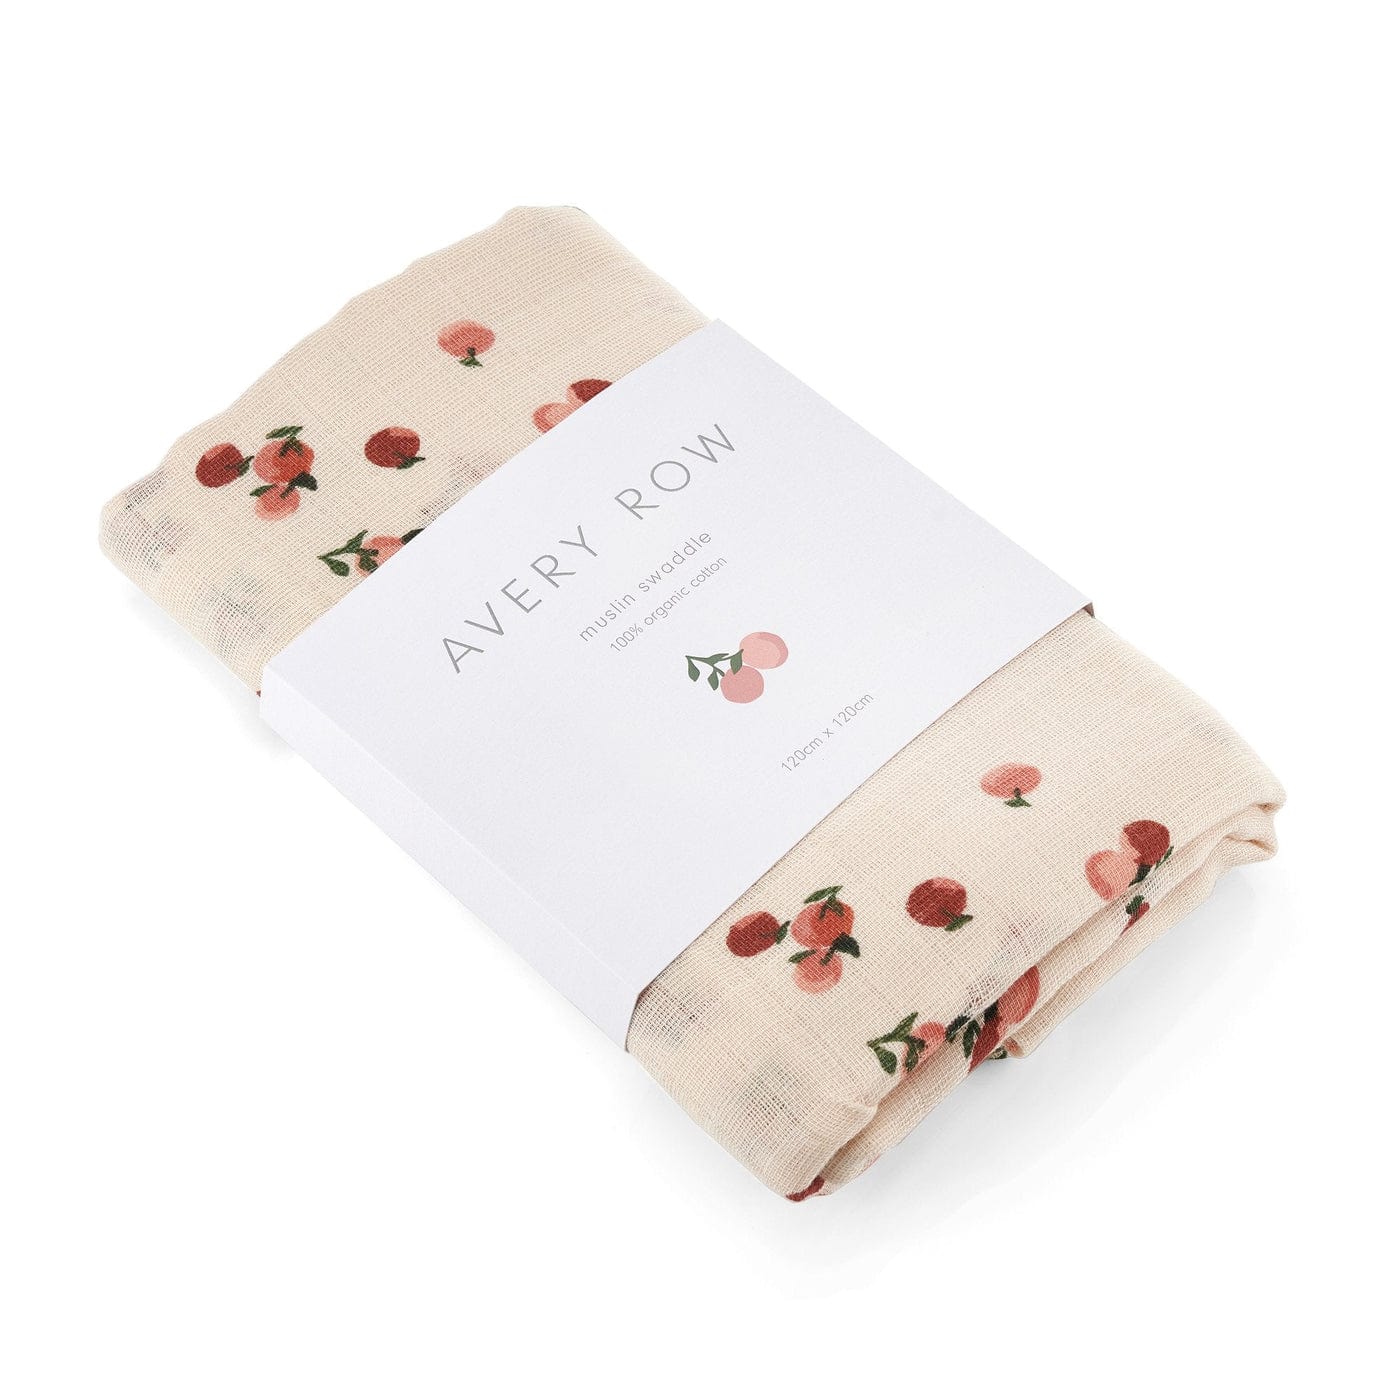 Avery Row Swaddles Organic Cotton Muslin Swaddle Blanket (Peaches)